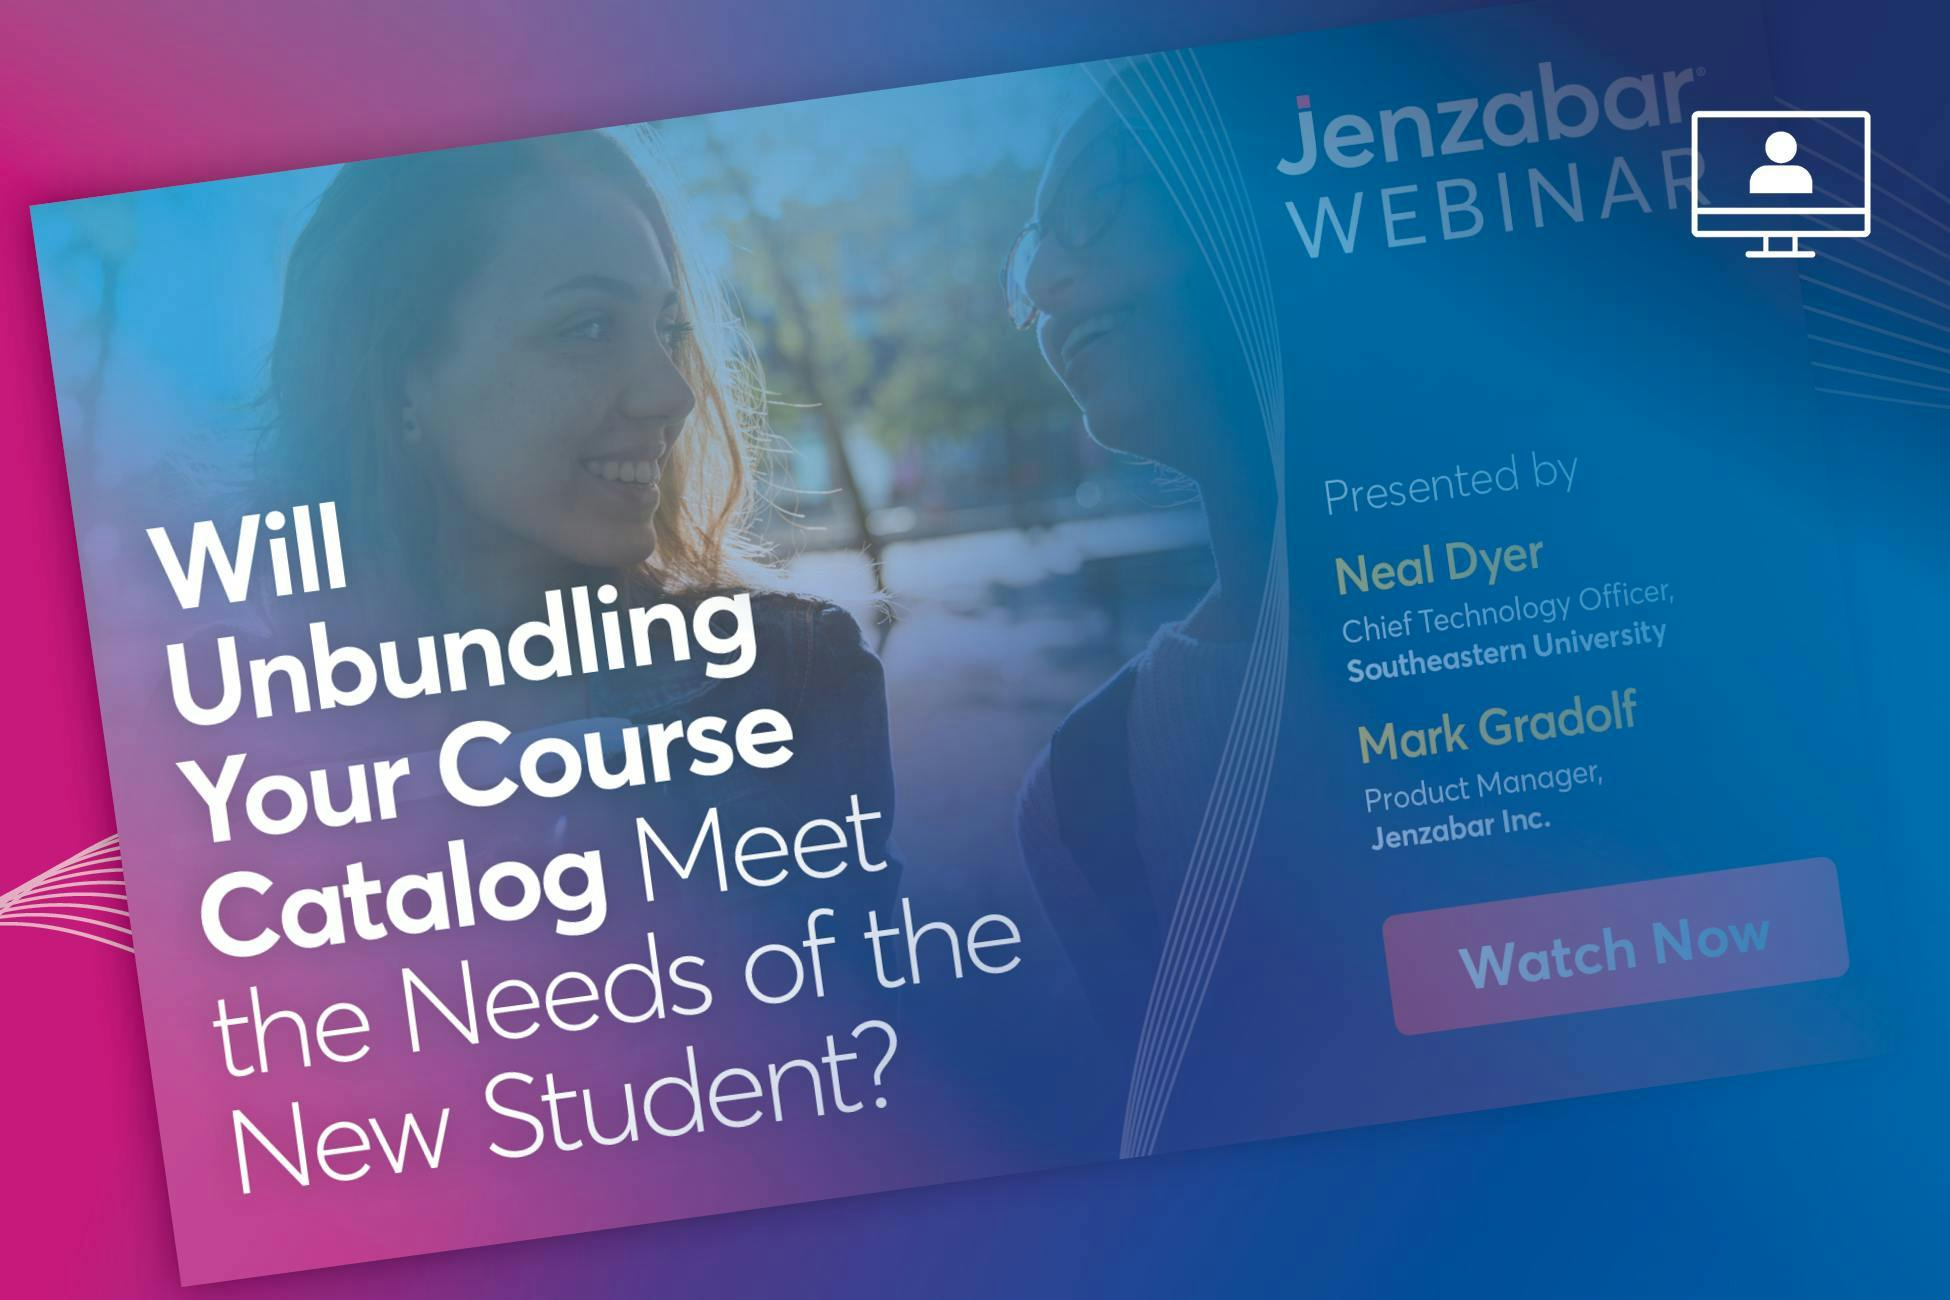 Webinar: Will Unbundling Your Course Catalog Meet the Needs of the New Student?